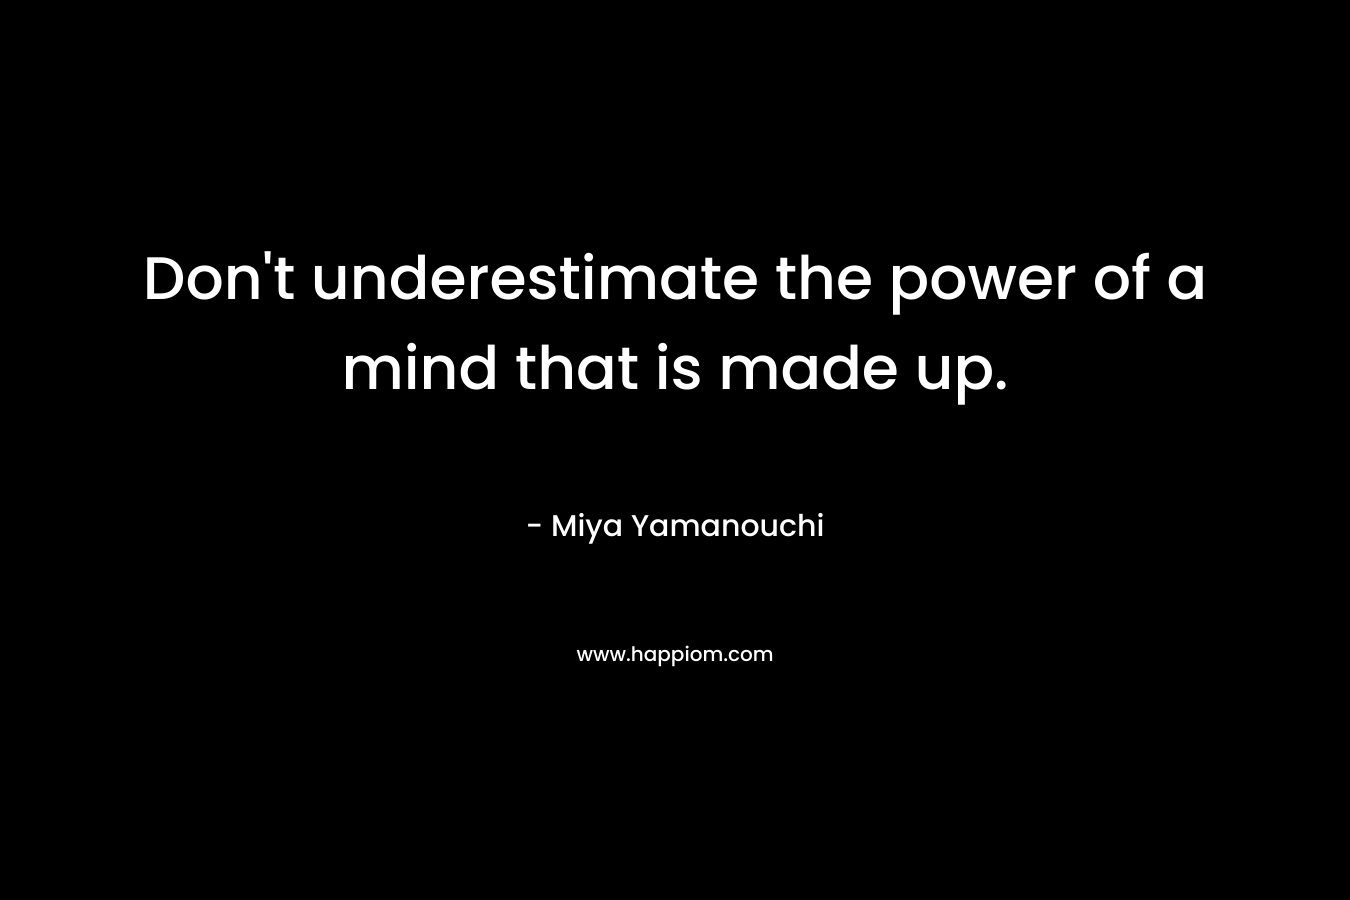 Don't underestimate the power of a mind that is made up.